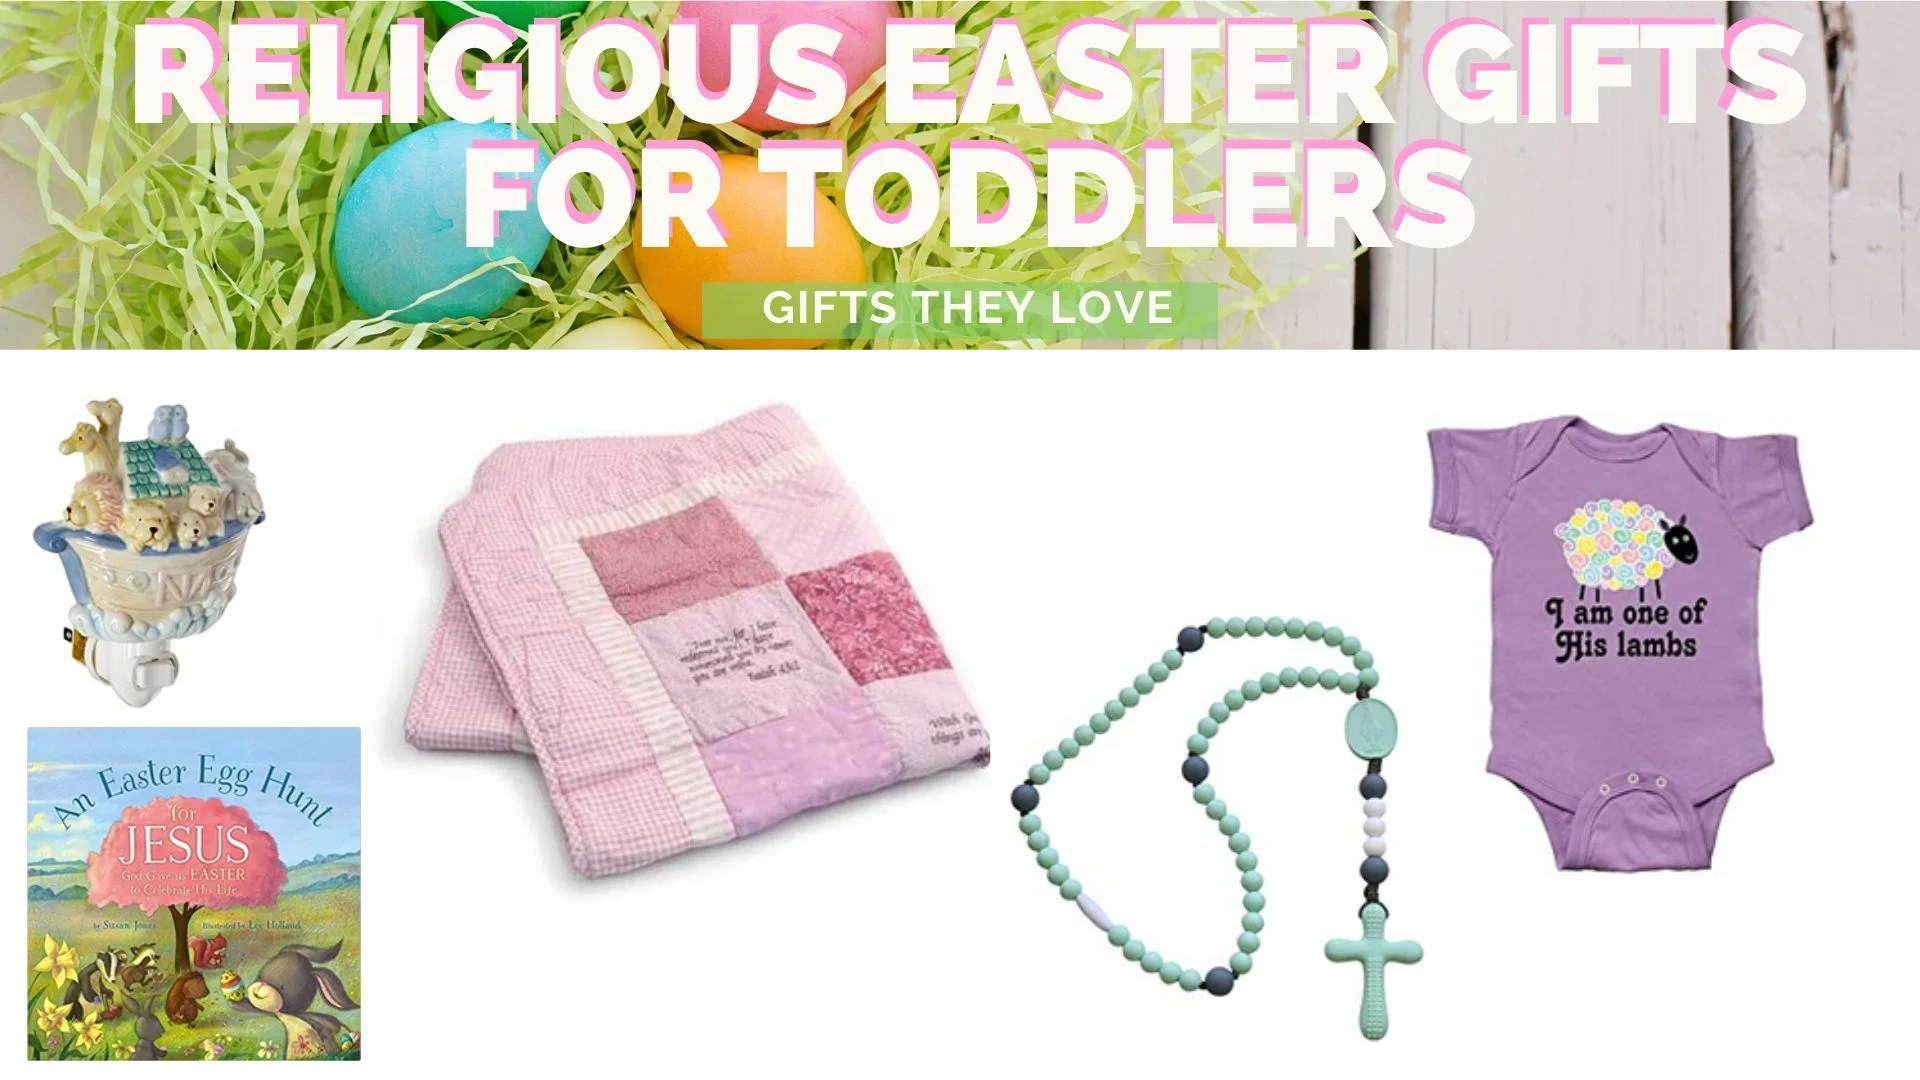 9 faithful religious easter gifts for toddlers and babies ideas